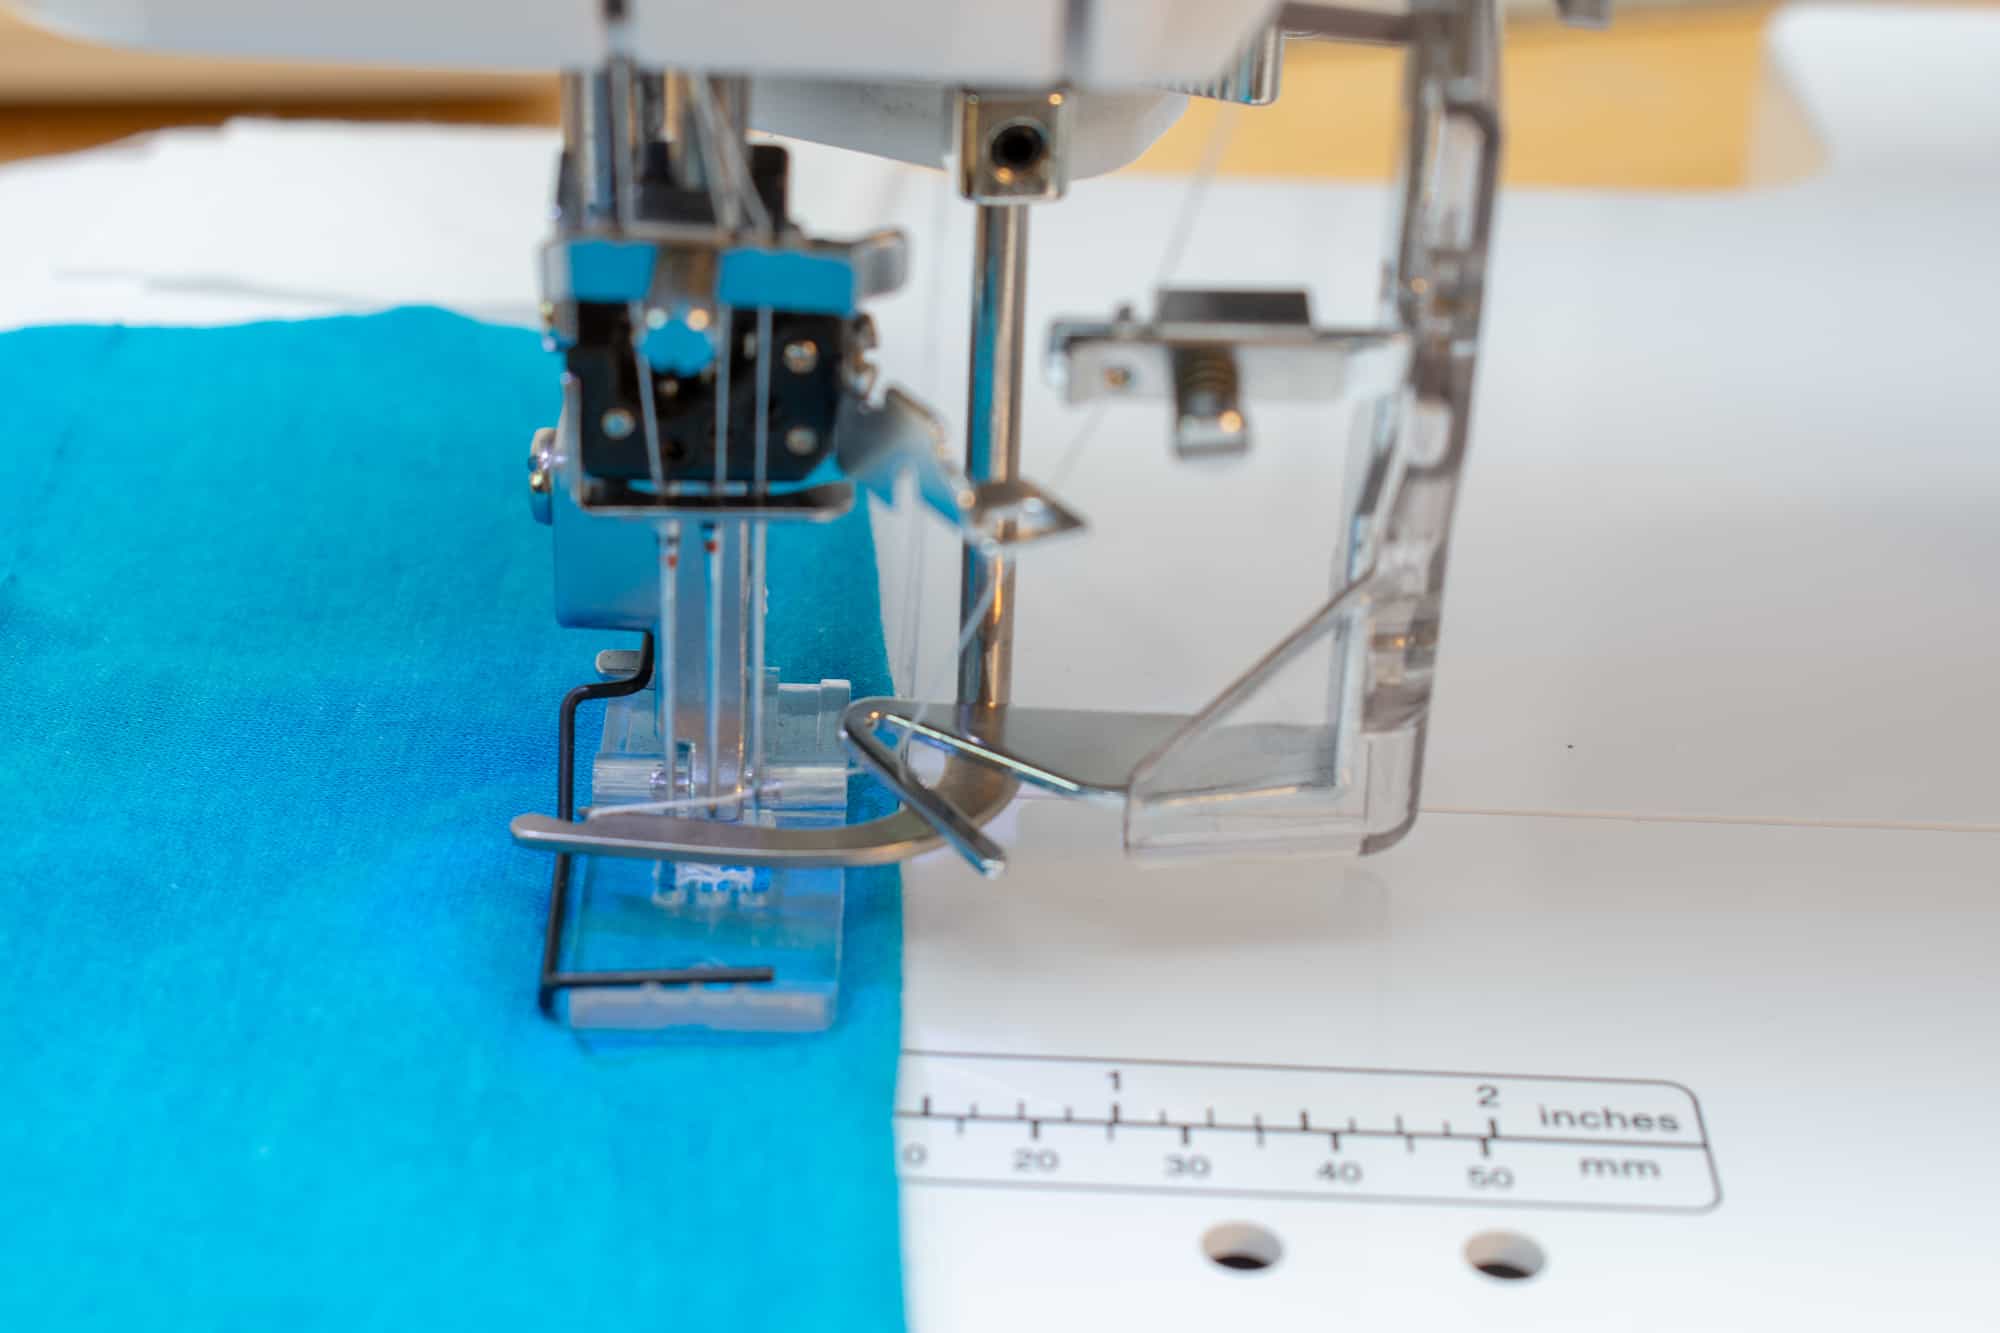 Brother CV3550 Coverstitch review